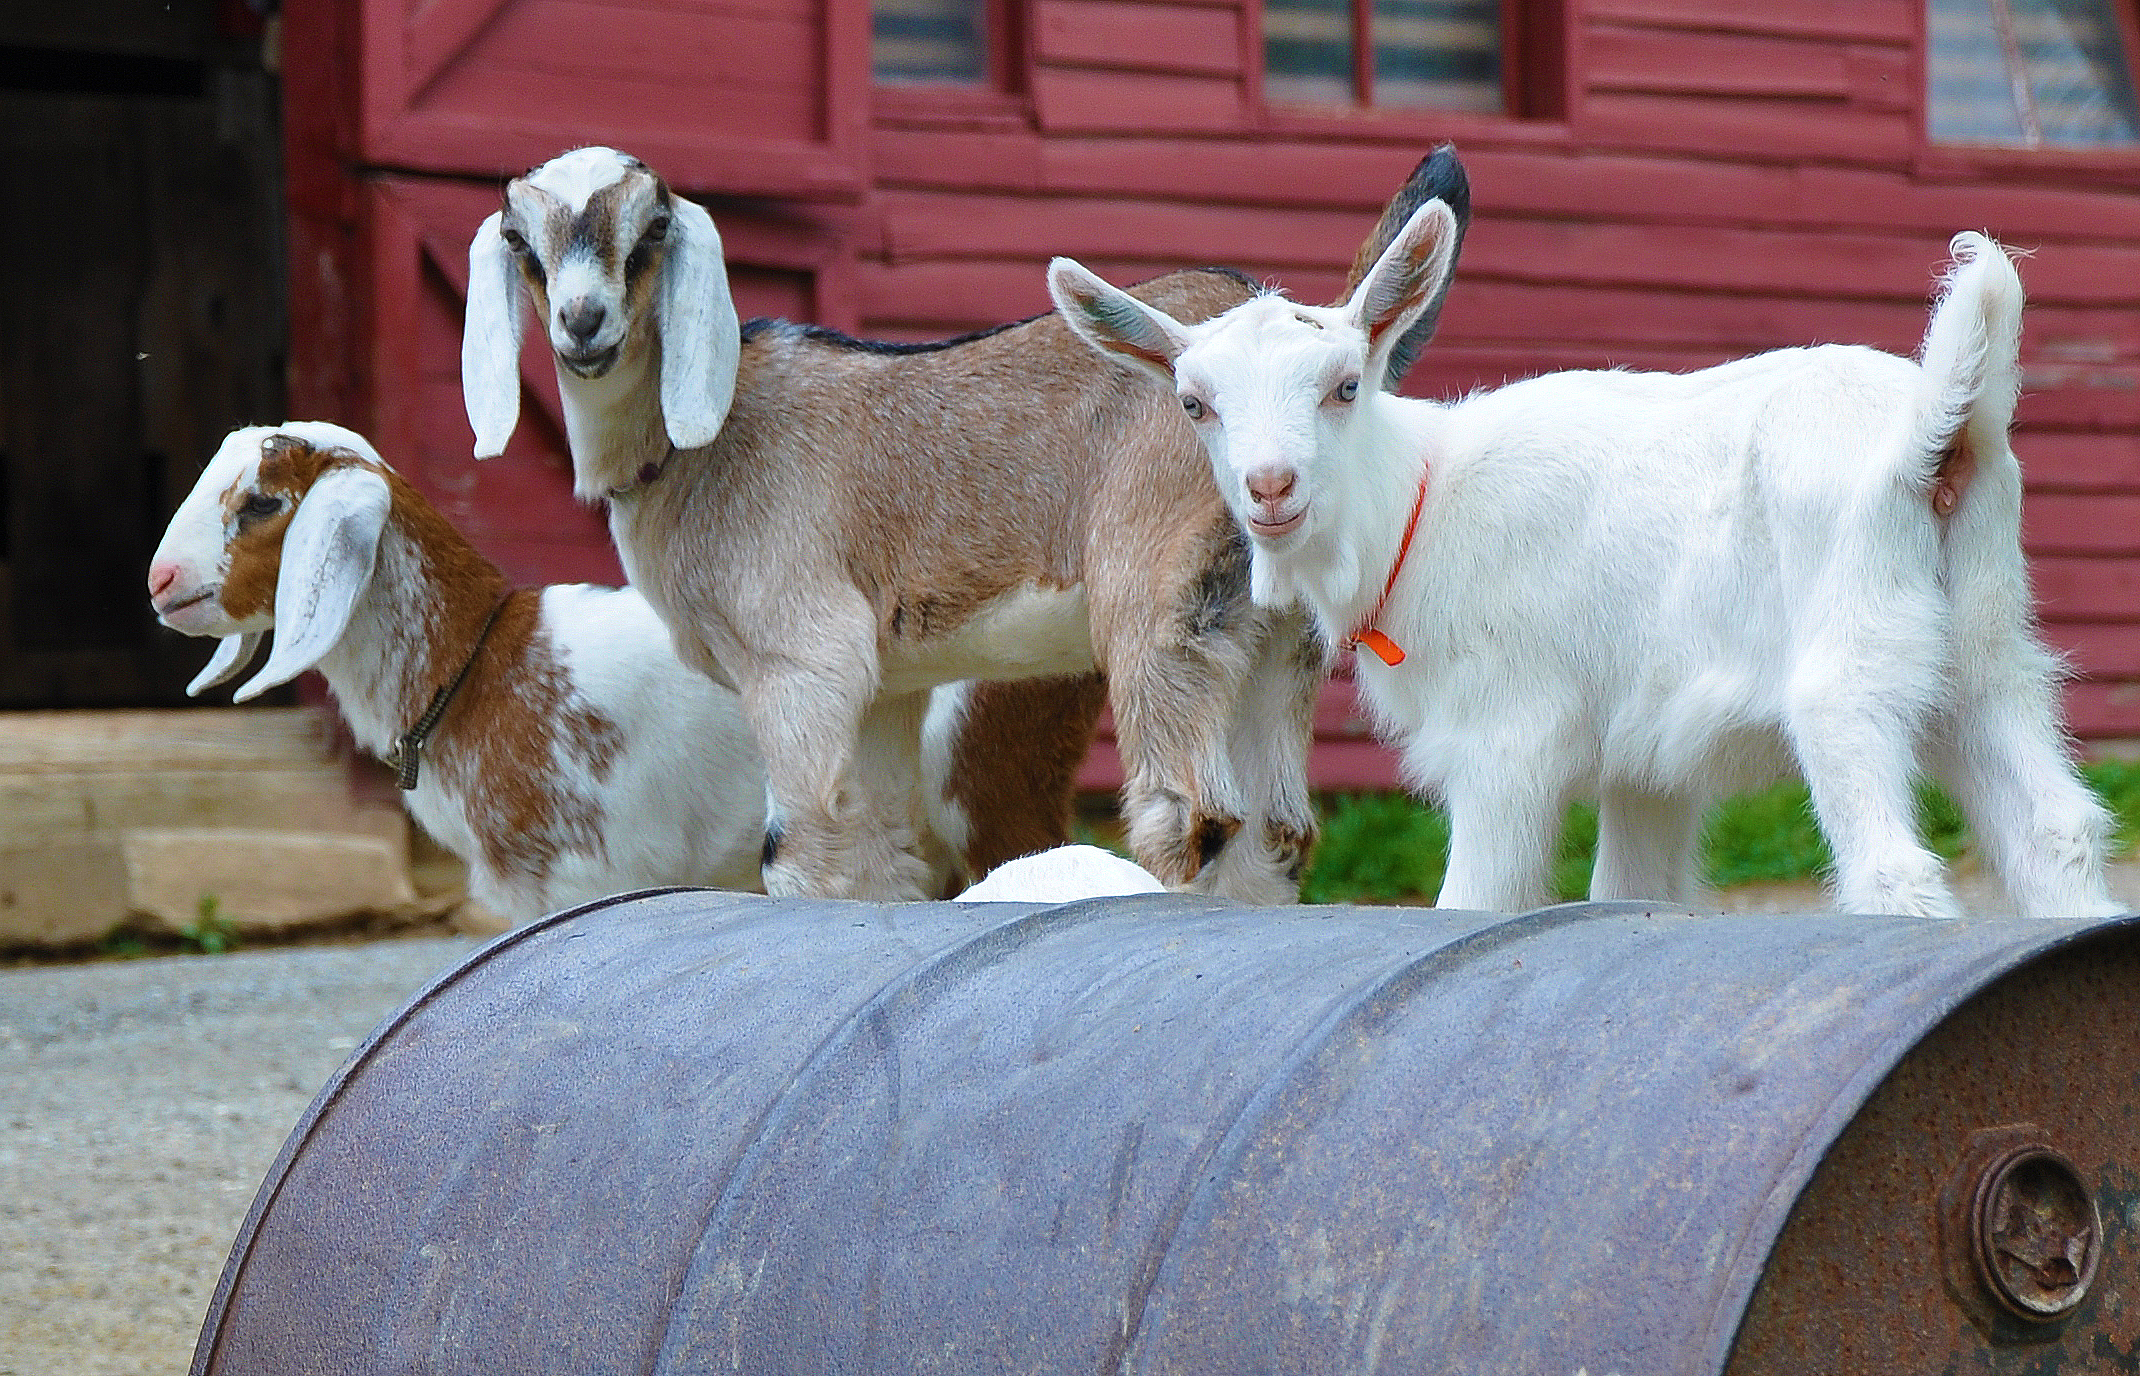 Spring-born kid goats greet visitors to the barn